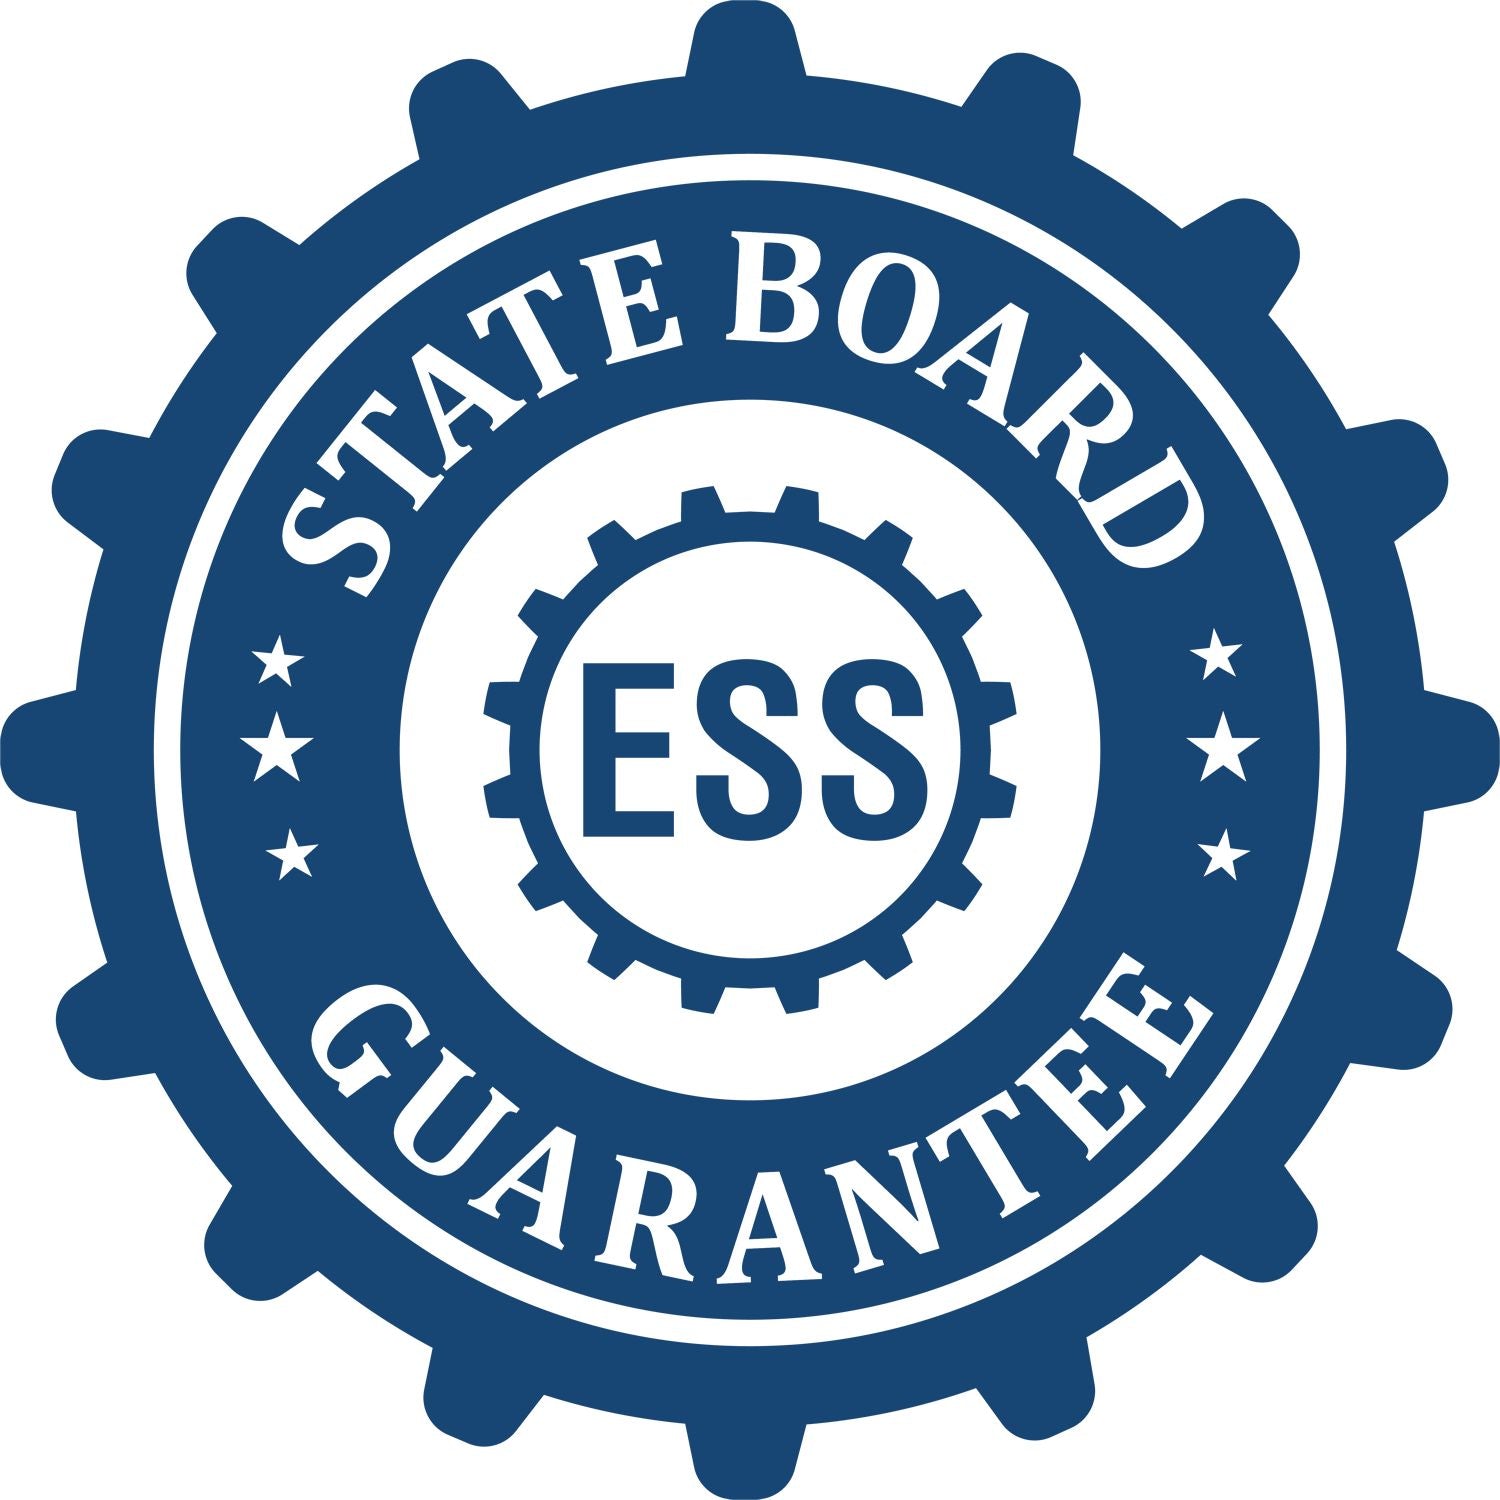 An emblem in a gear shape illustrating a state board guarantee for the Heavy Duty Connecticut Landscape Architect Cast Iron Embosser product.